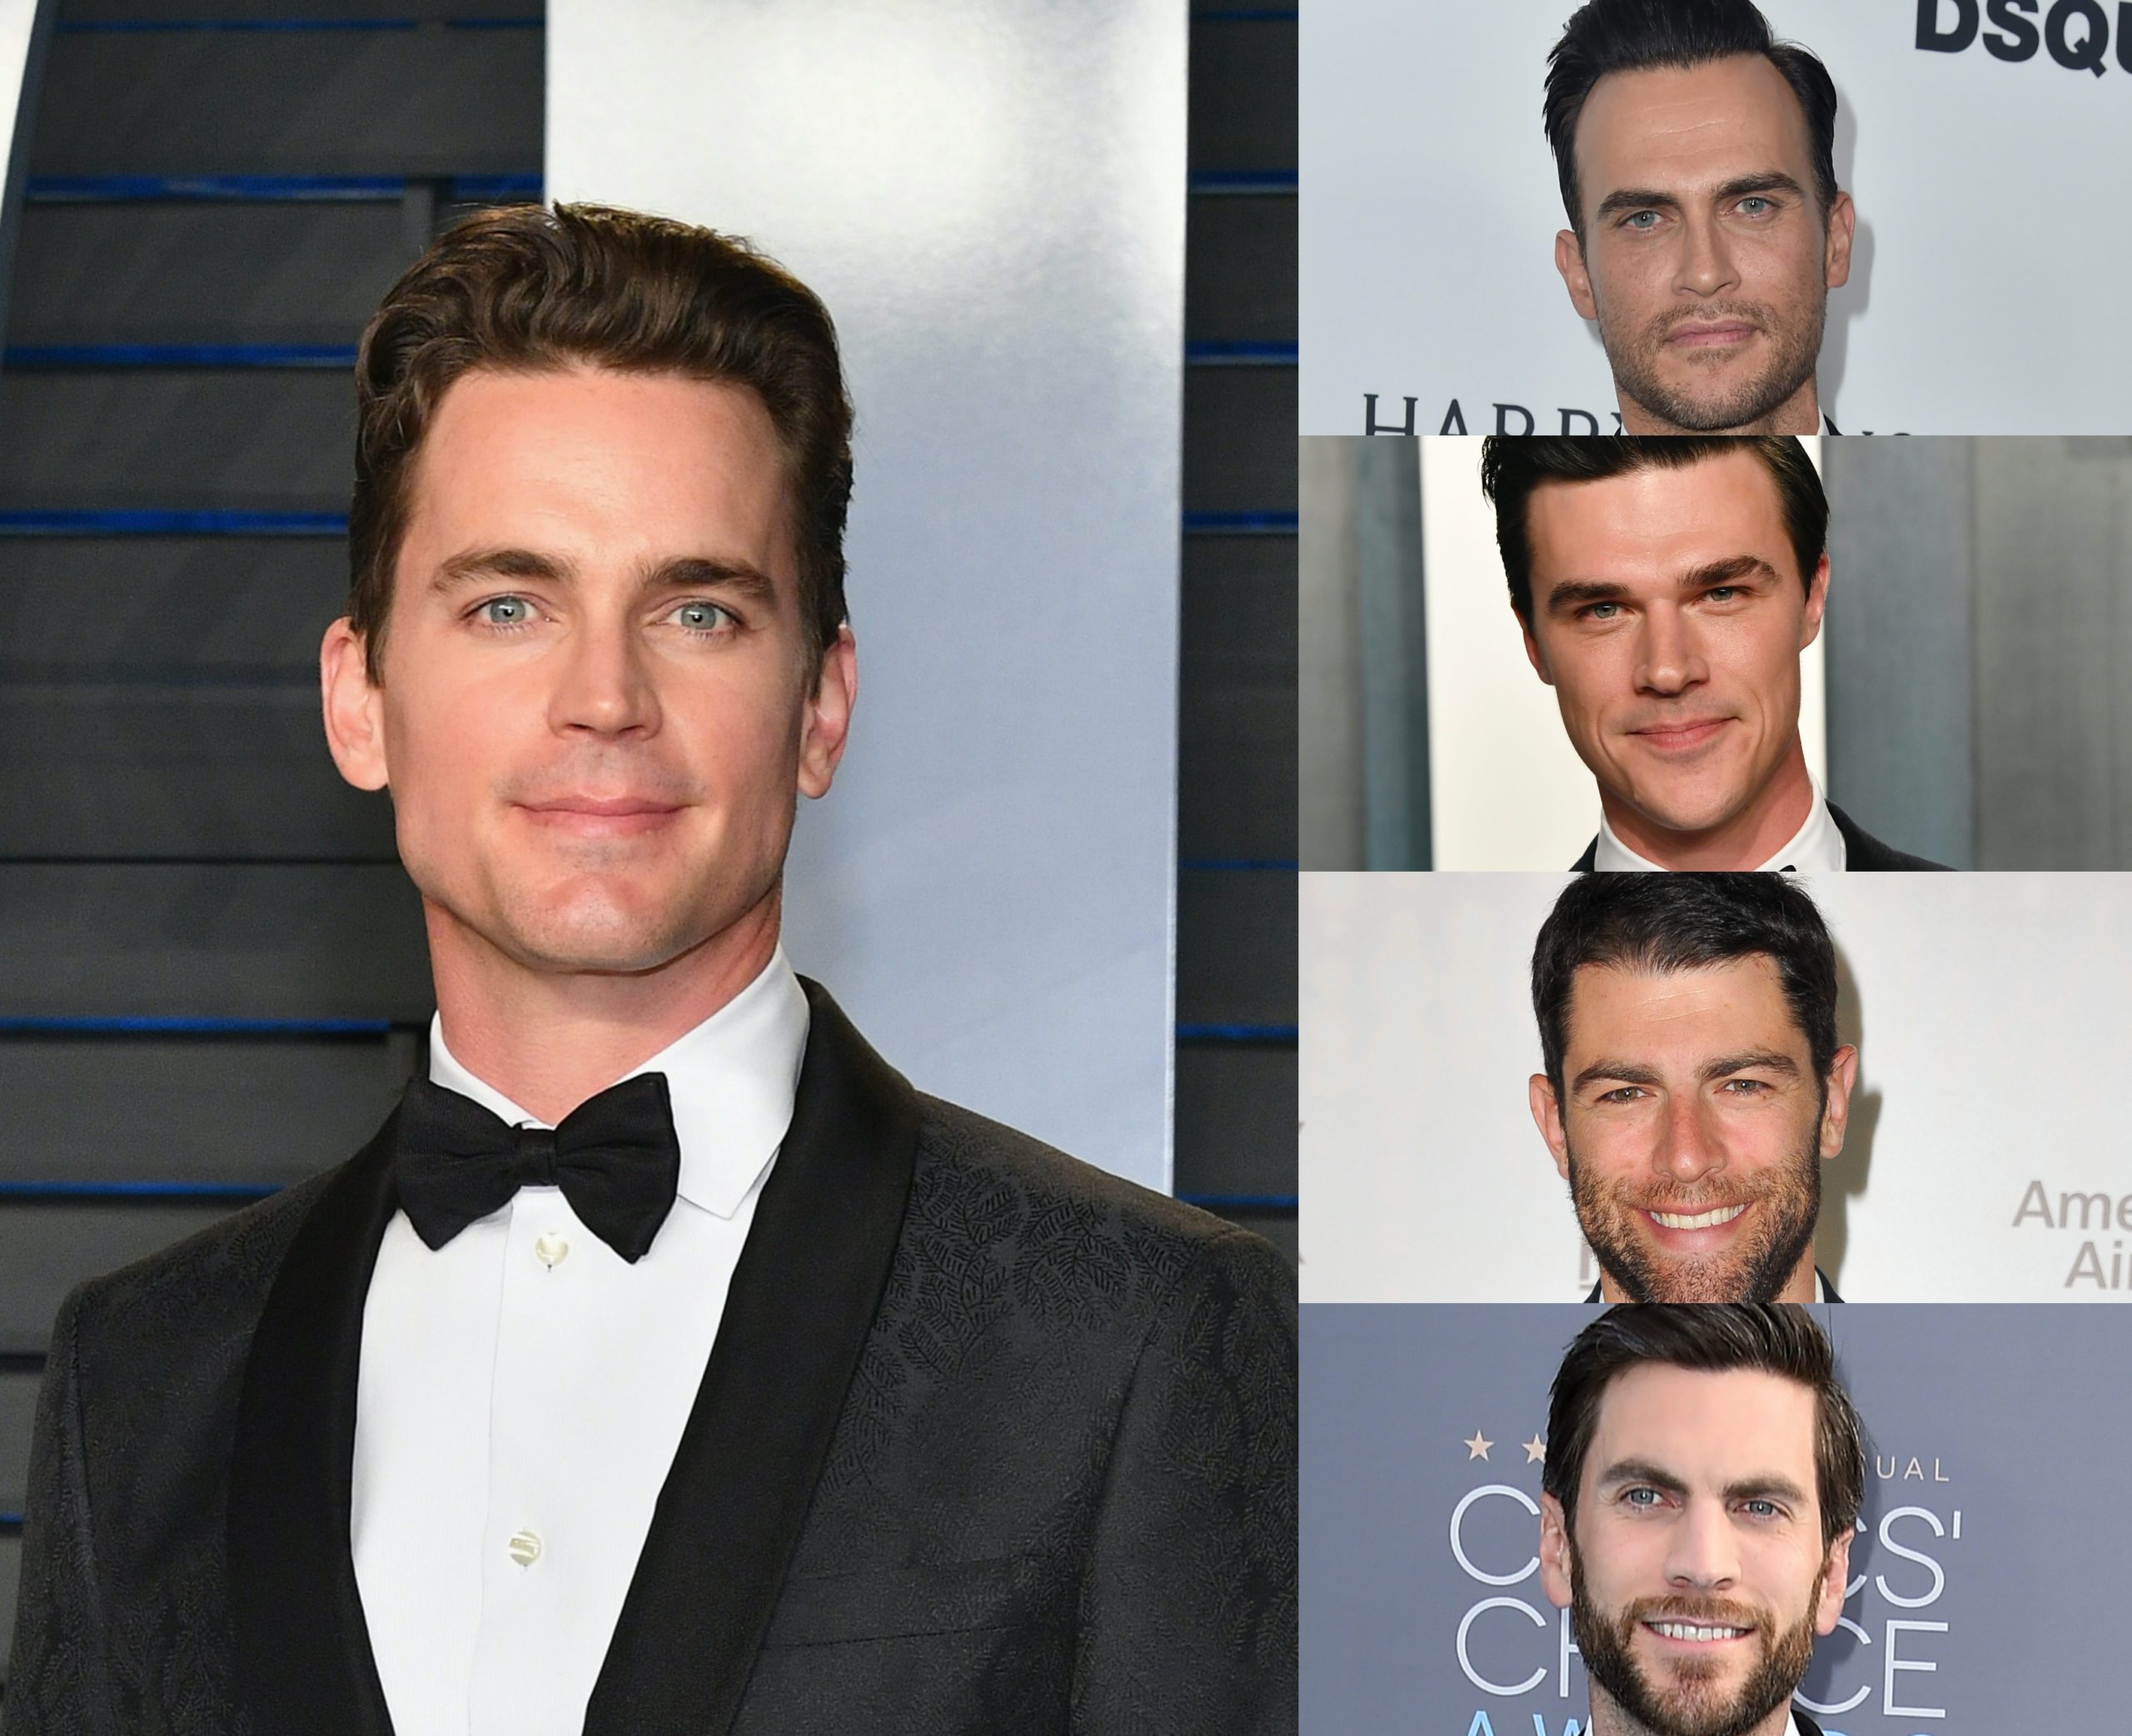 (Clockwise) Actors Cheyenne Jackson, Fin Wittrock, Max Greenfield Wes Bentley and Matt Bomer. (Getty Images)